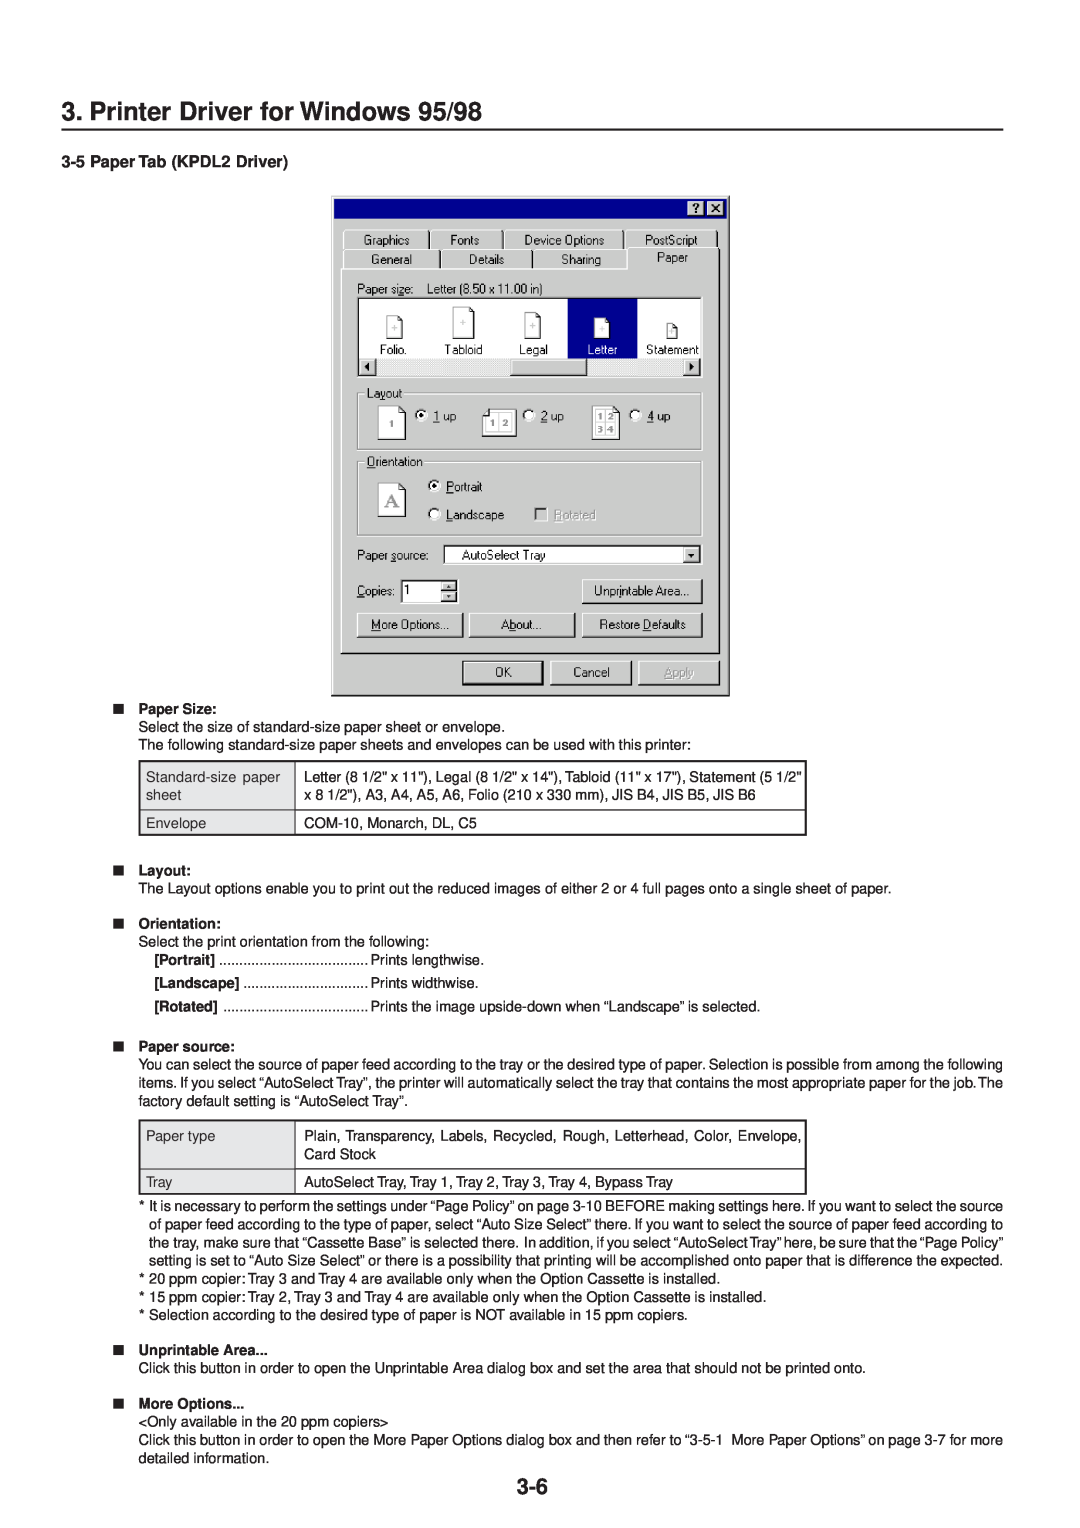 IBM Printing System manual Printer Driver for Windows 95/98, Paper Tab KPDL2 Driver, Paper Size, Layout, Orientation 